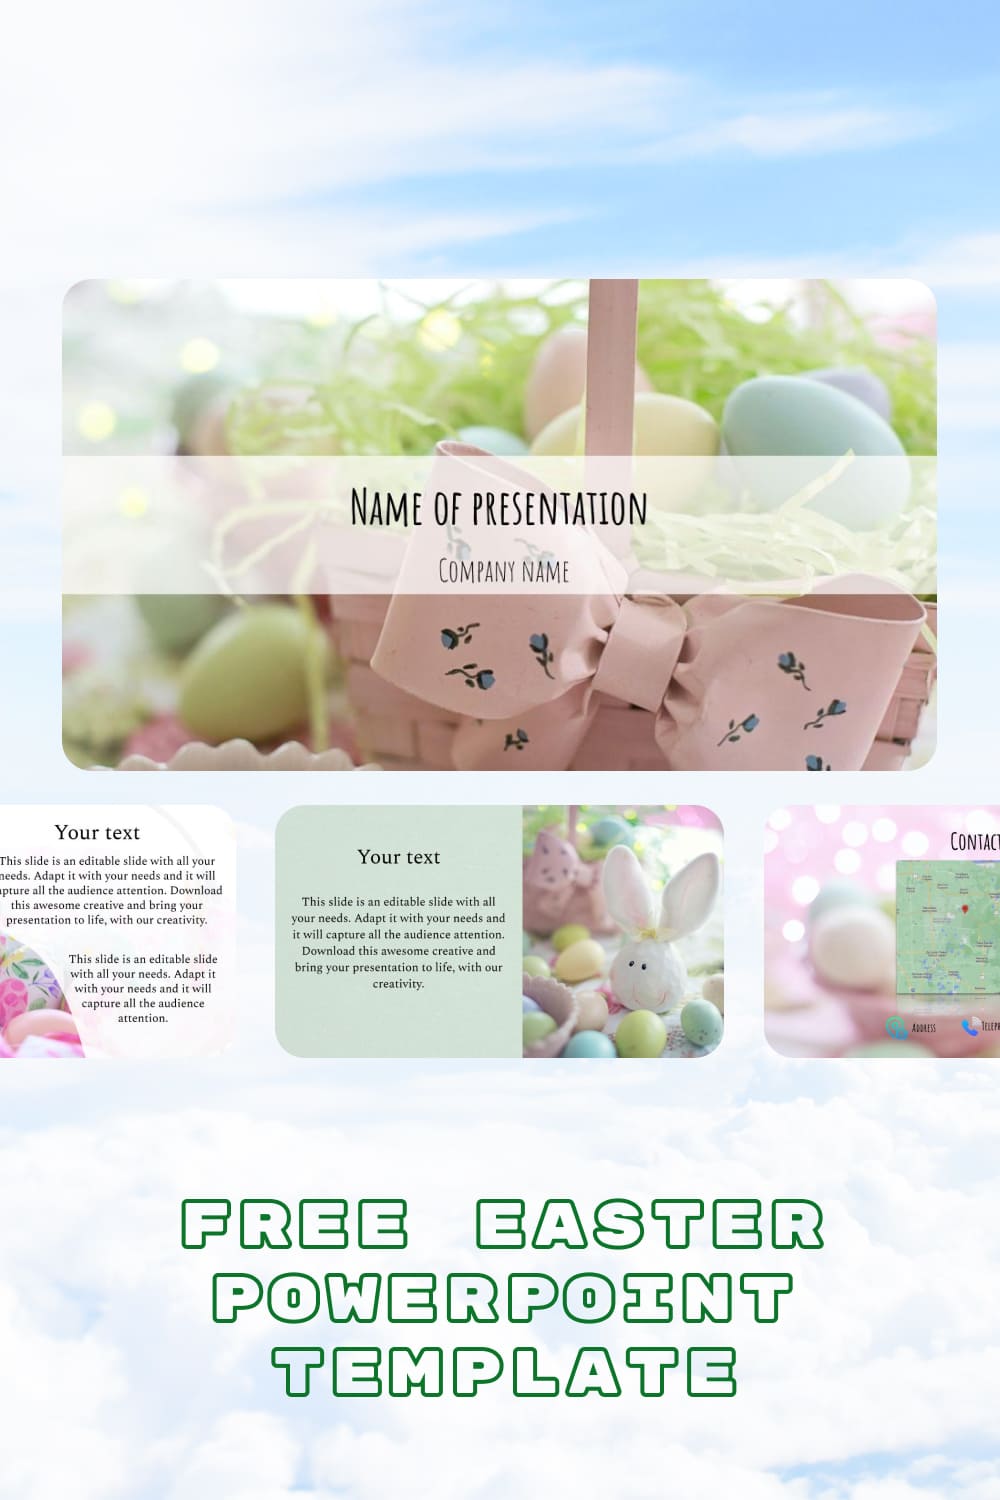 Pint Free Easter Powerpoint Template.